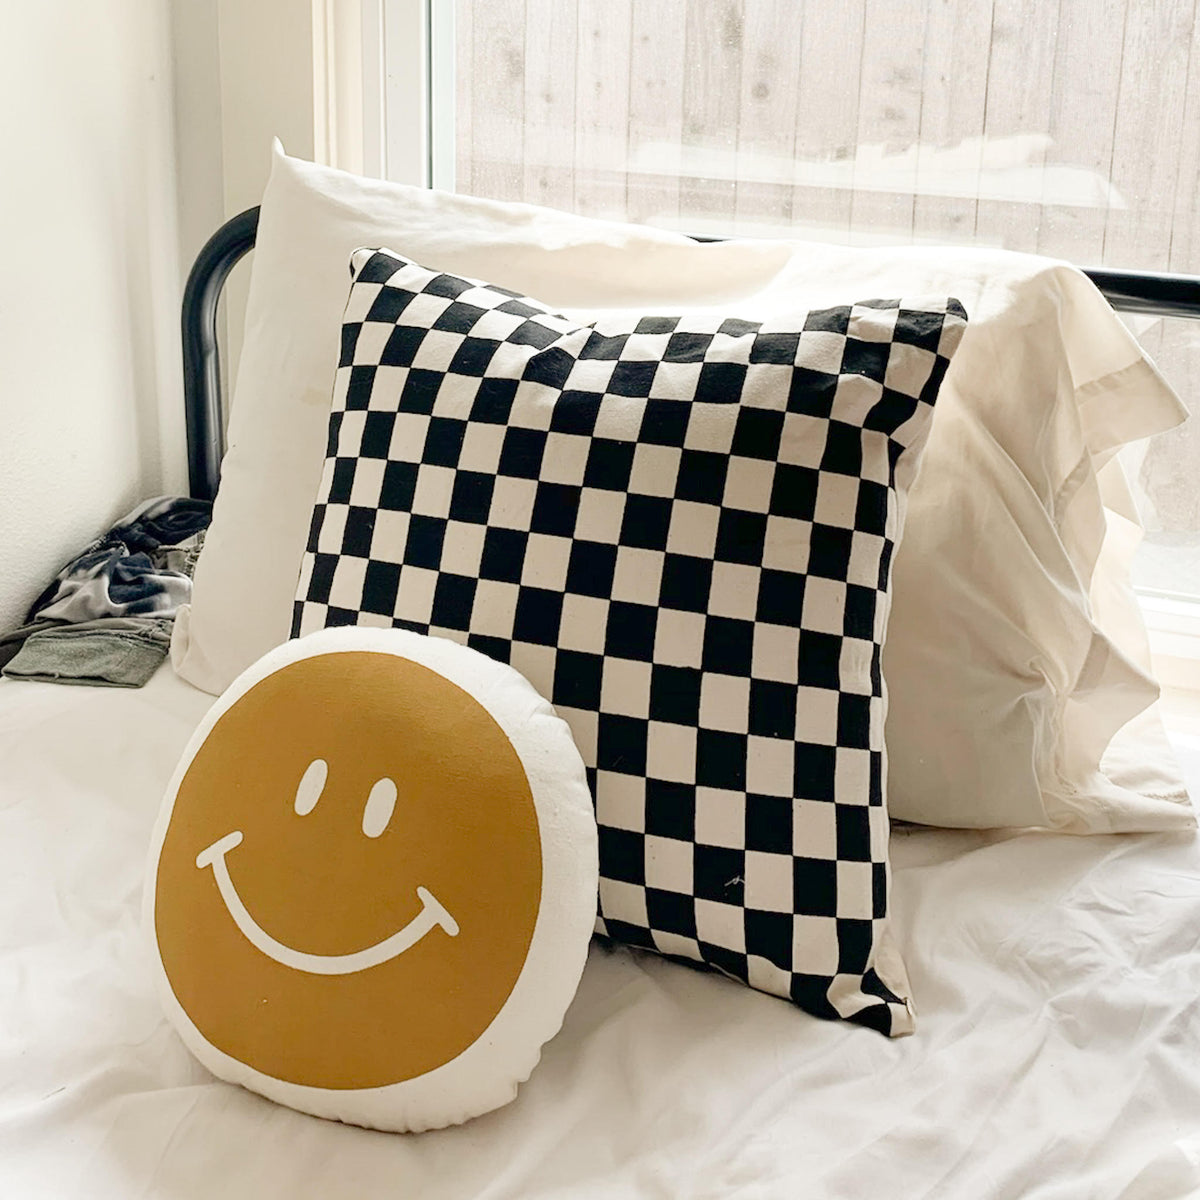 Black and White Checkered Pillow Cover - Holistic Habitat 